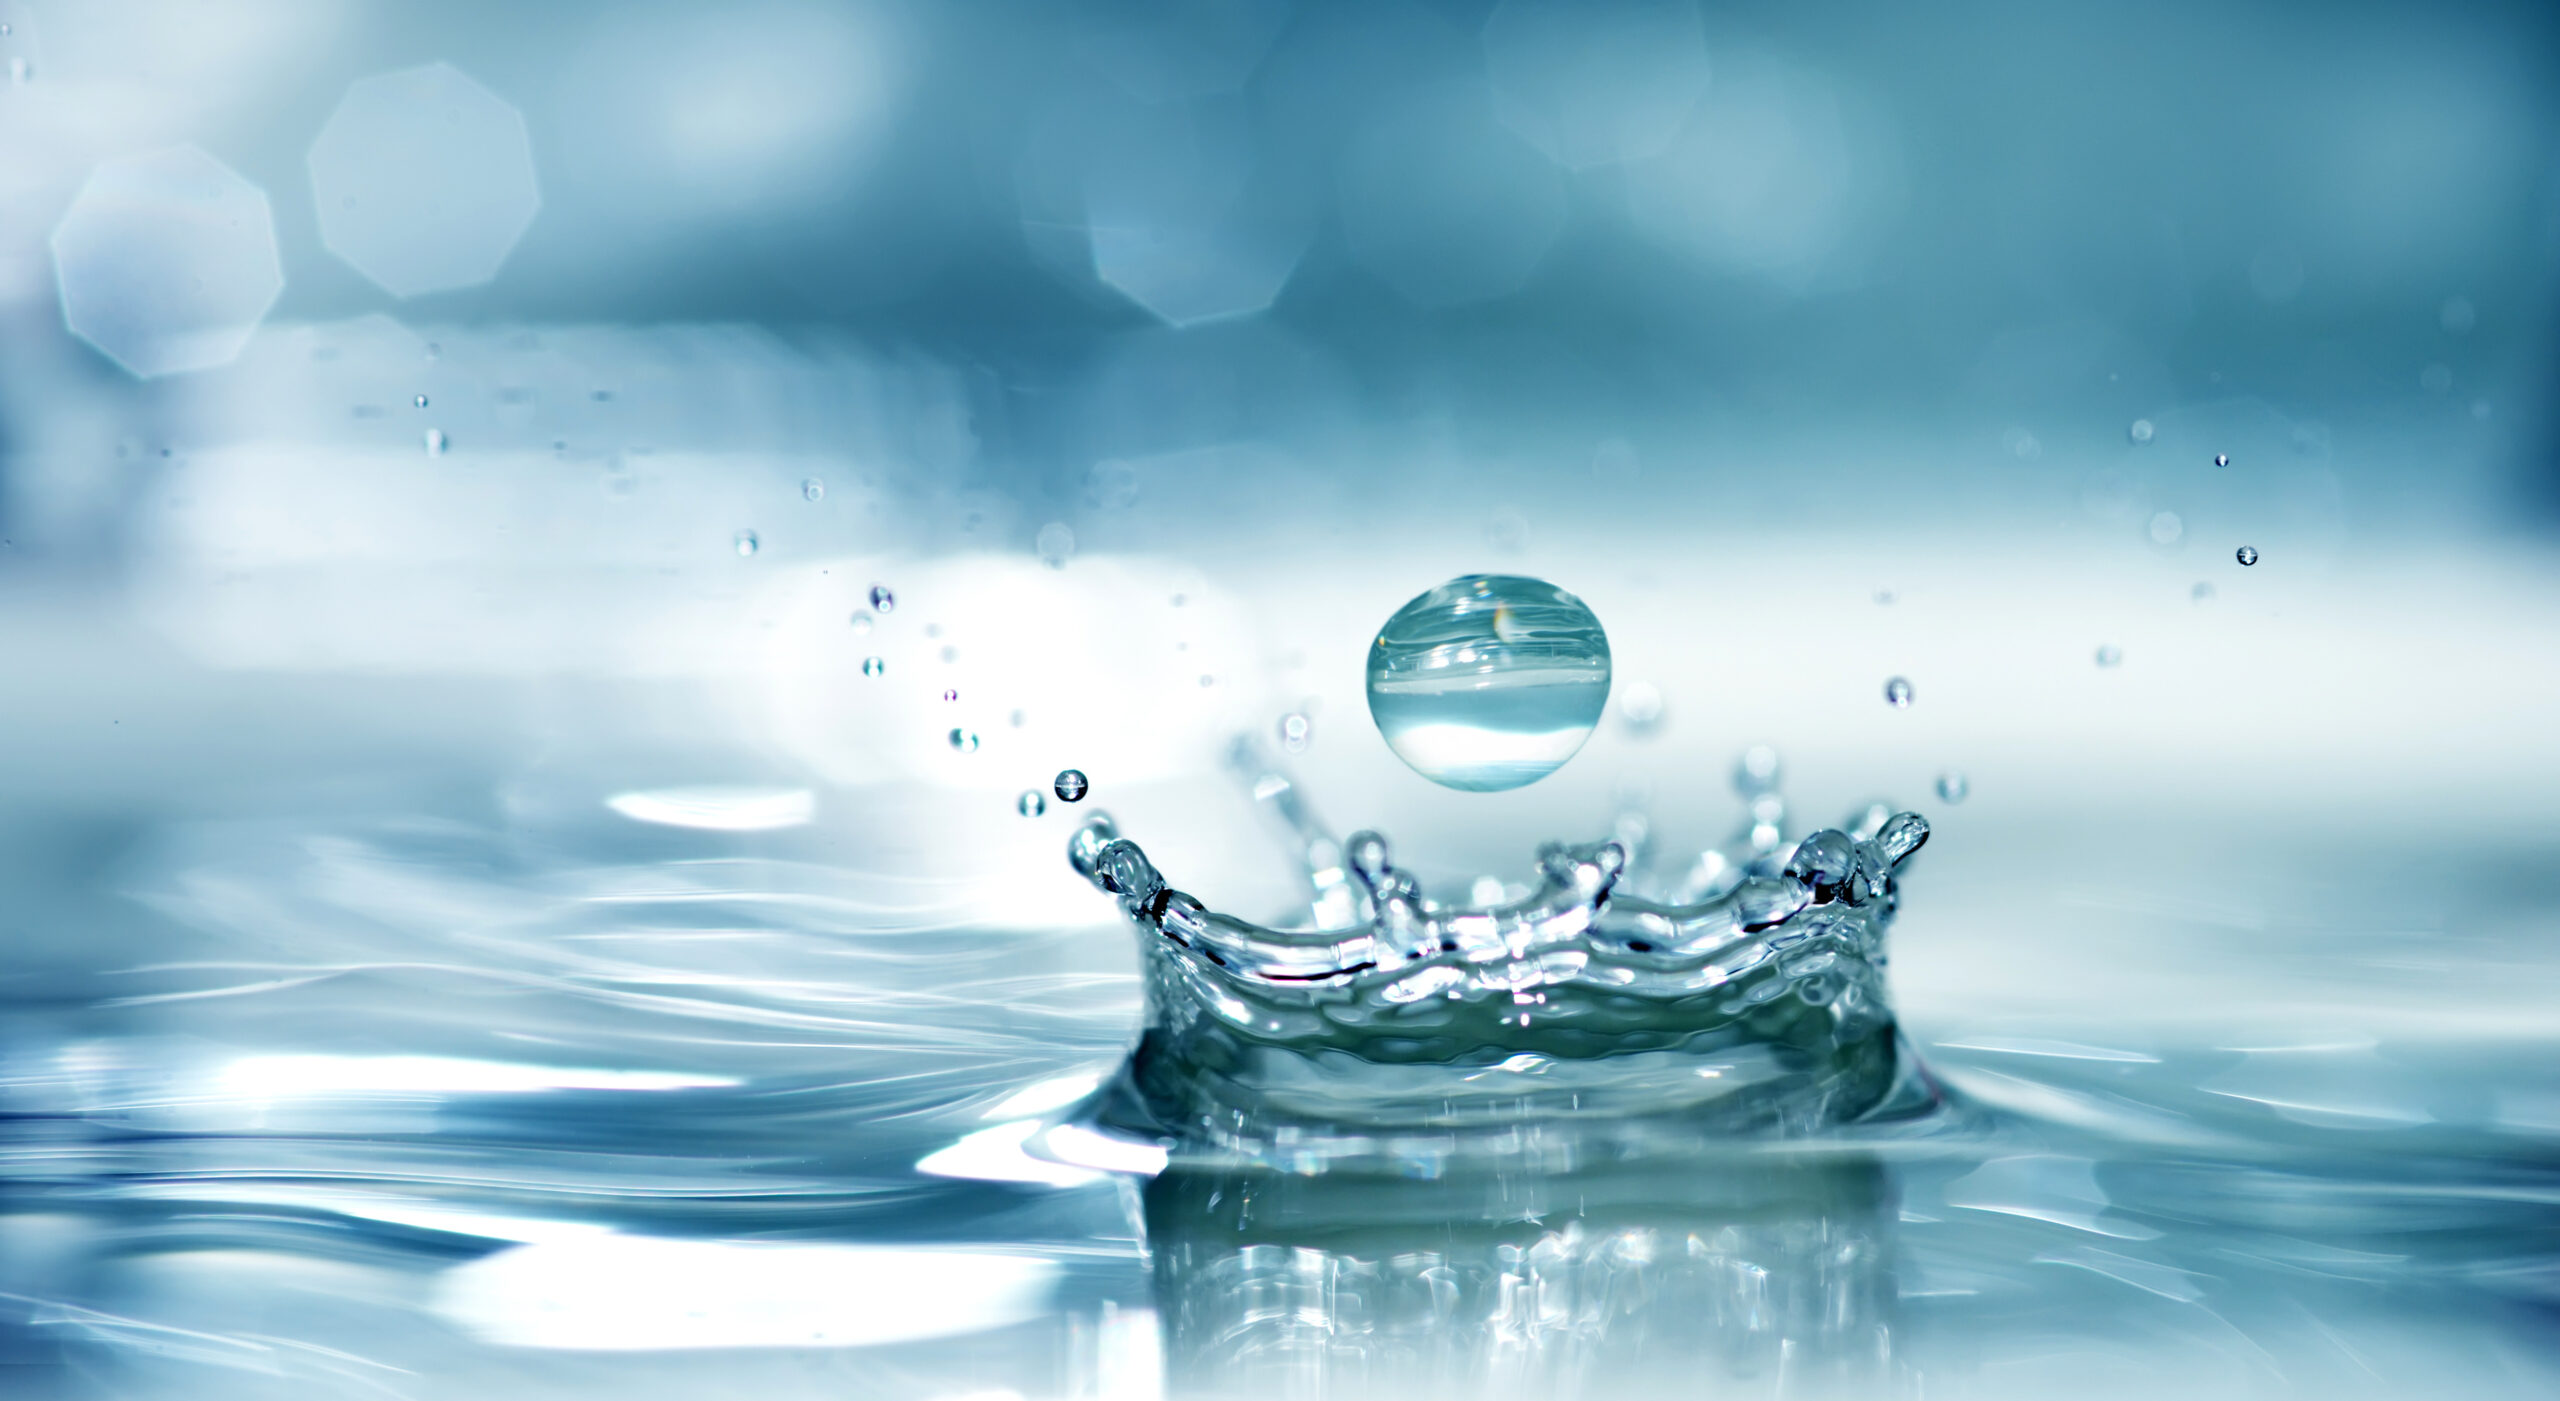 Cohesive (Vetasi)’s consolidated IBM Maximo implementation improves processes for Affinity Water